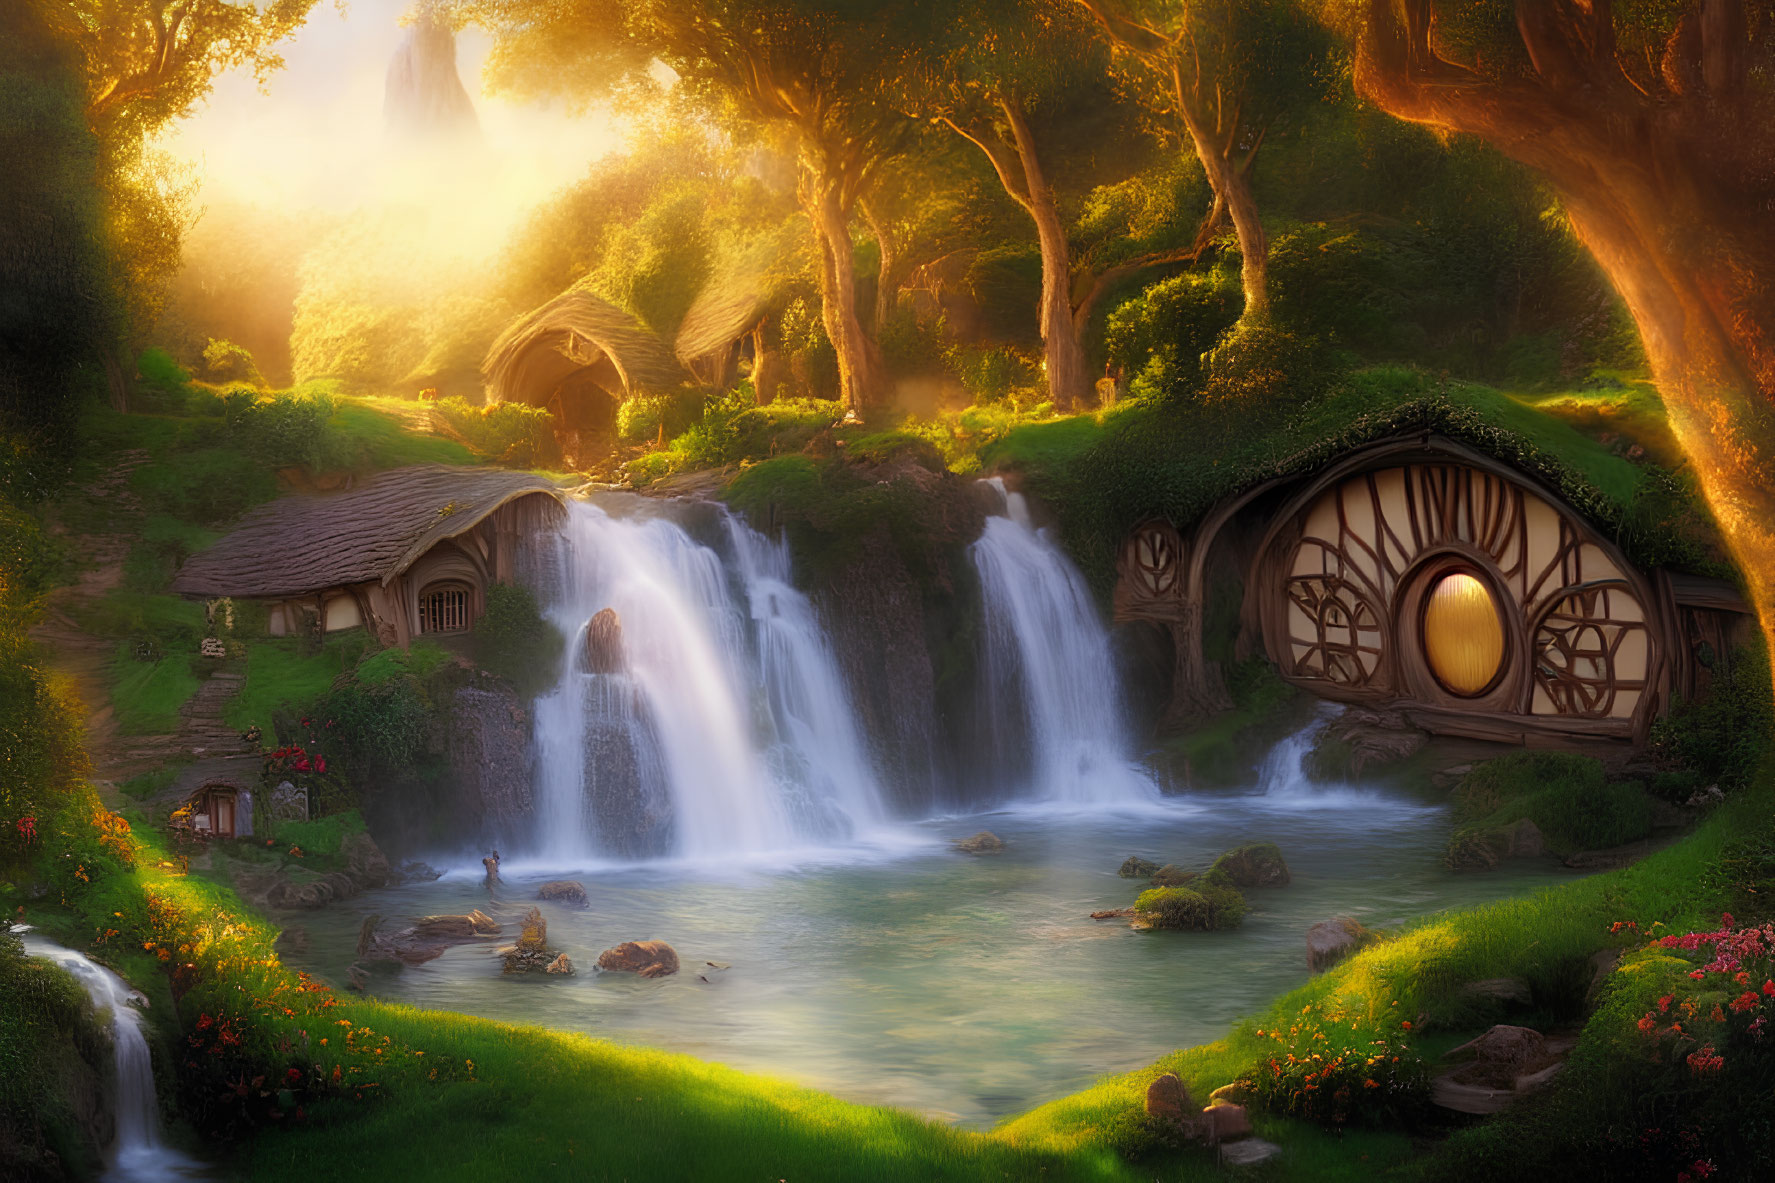 Sunlit mystical landscape with circular door cottage, cascading waterfalls, lush greenery